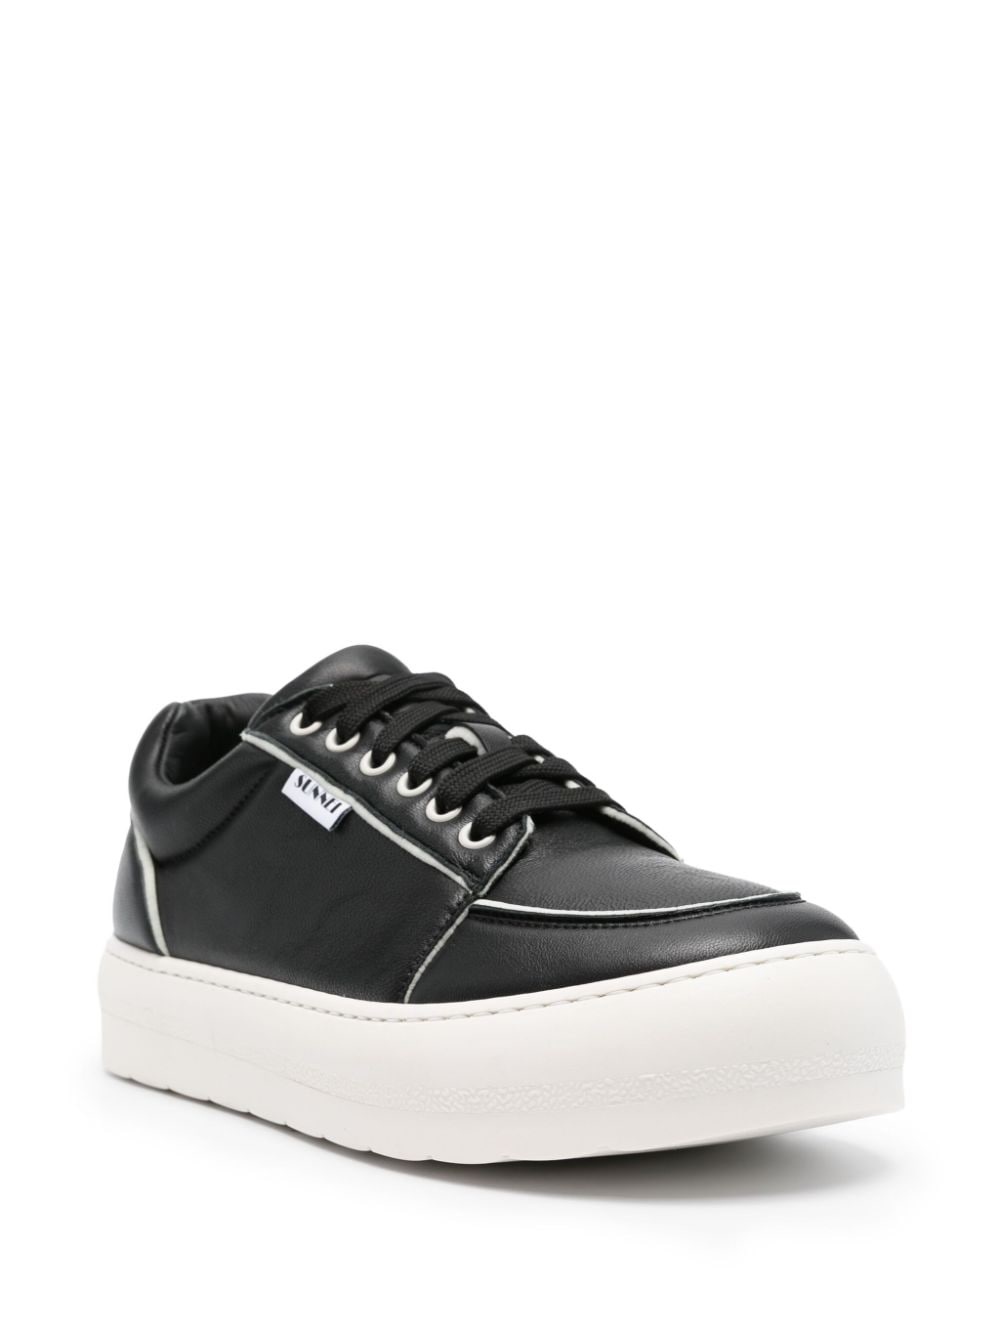 Dreamy leather flatform sneakers - 2